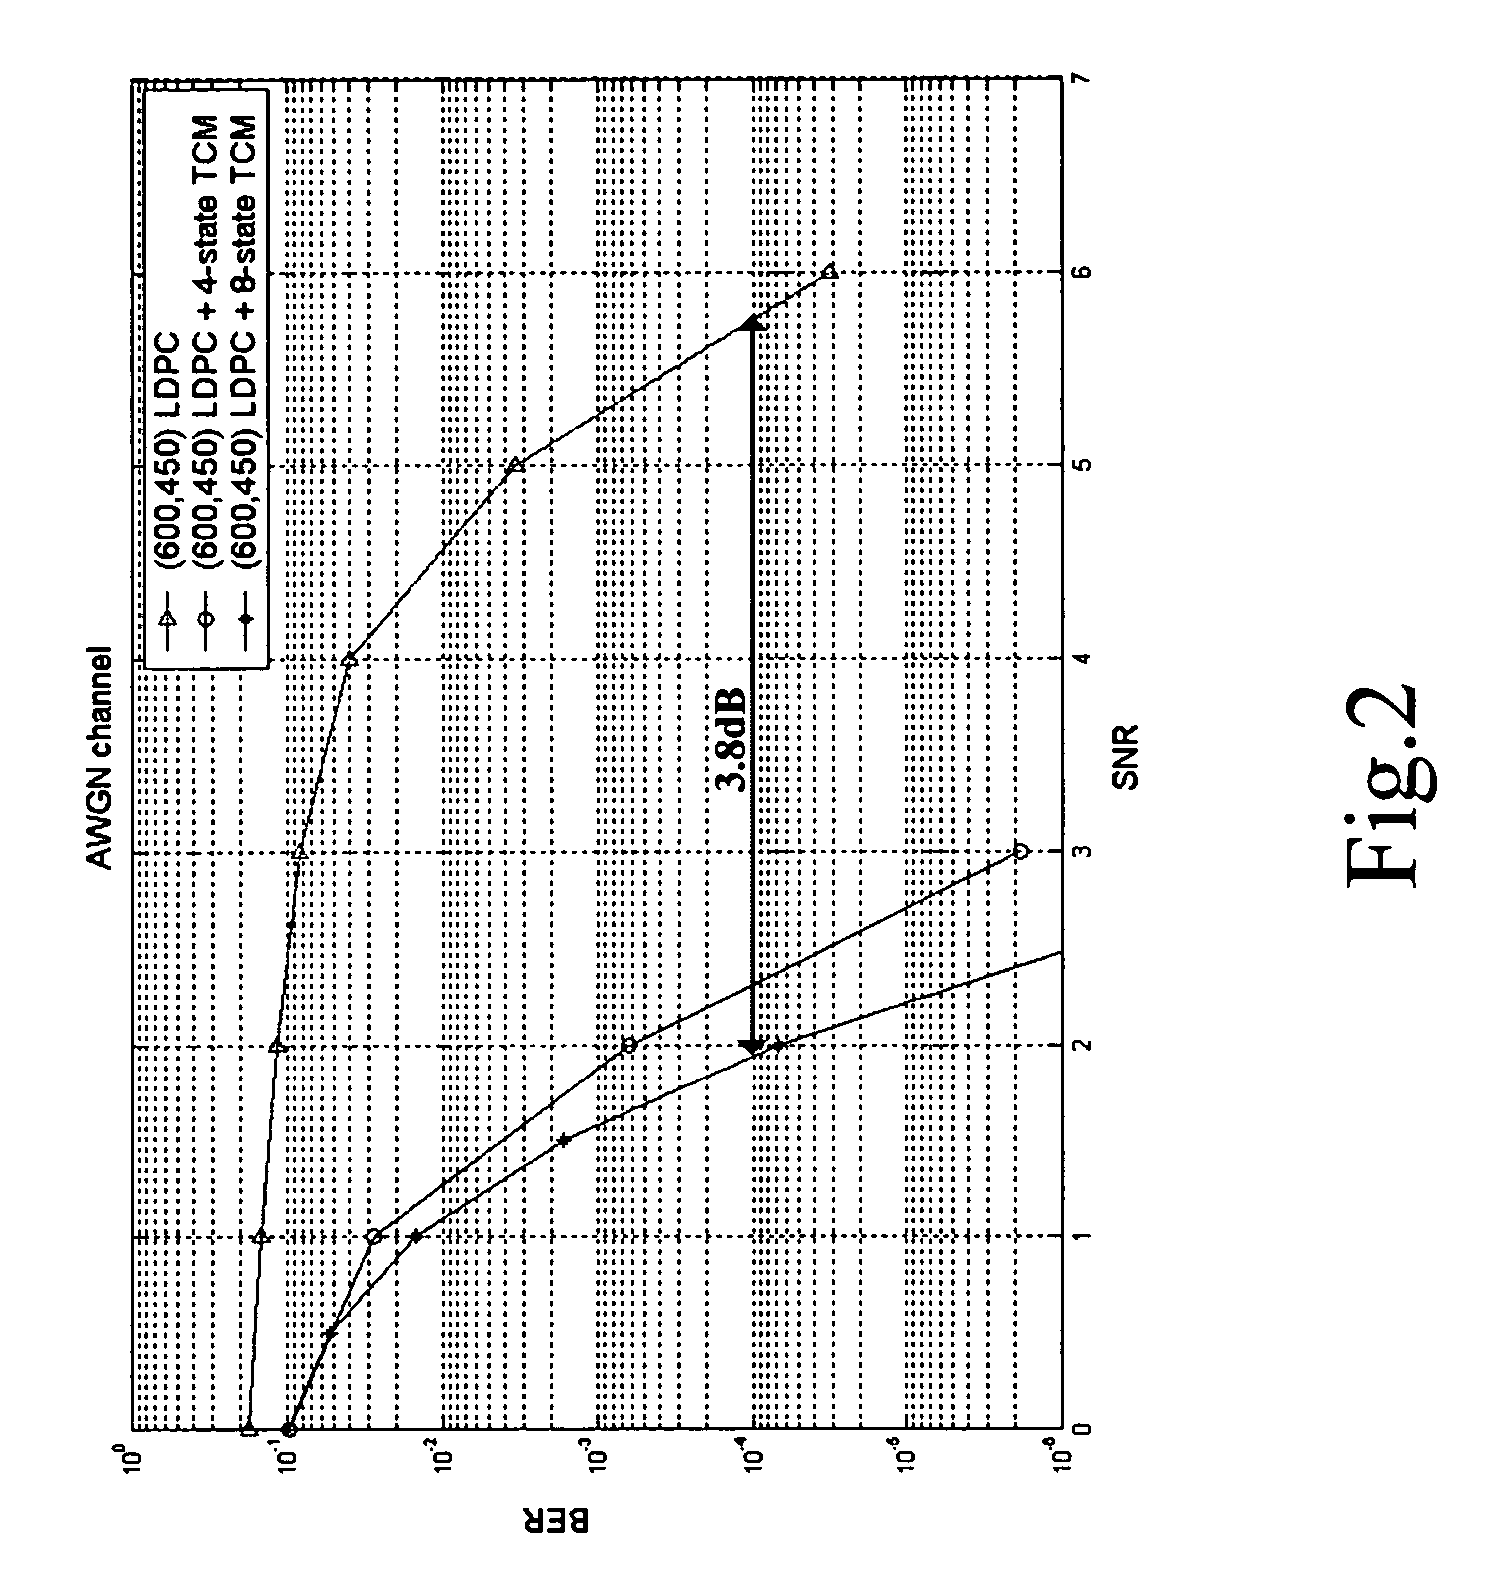 Transmission method combining trellis coded modulation and low-density parity check code and architecture thereof